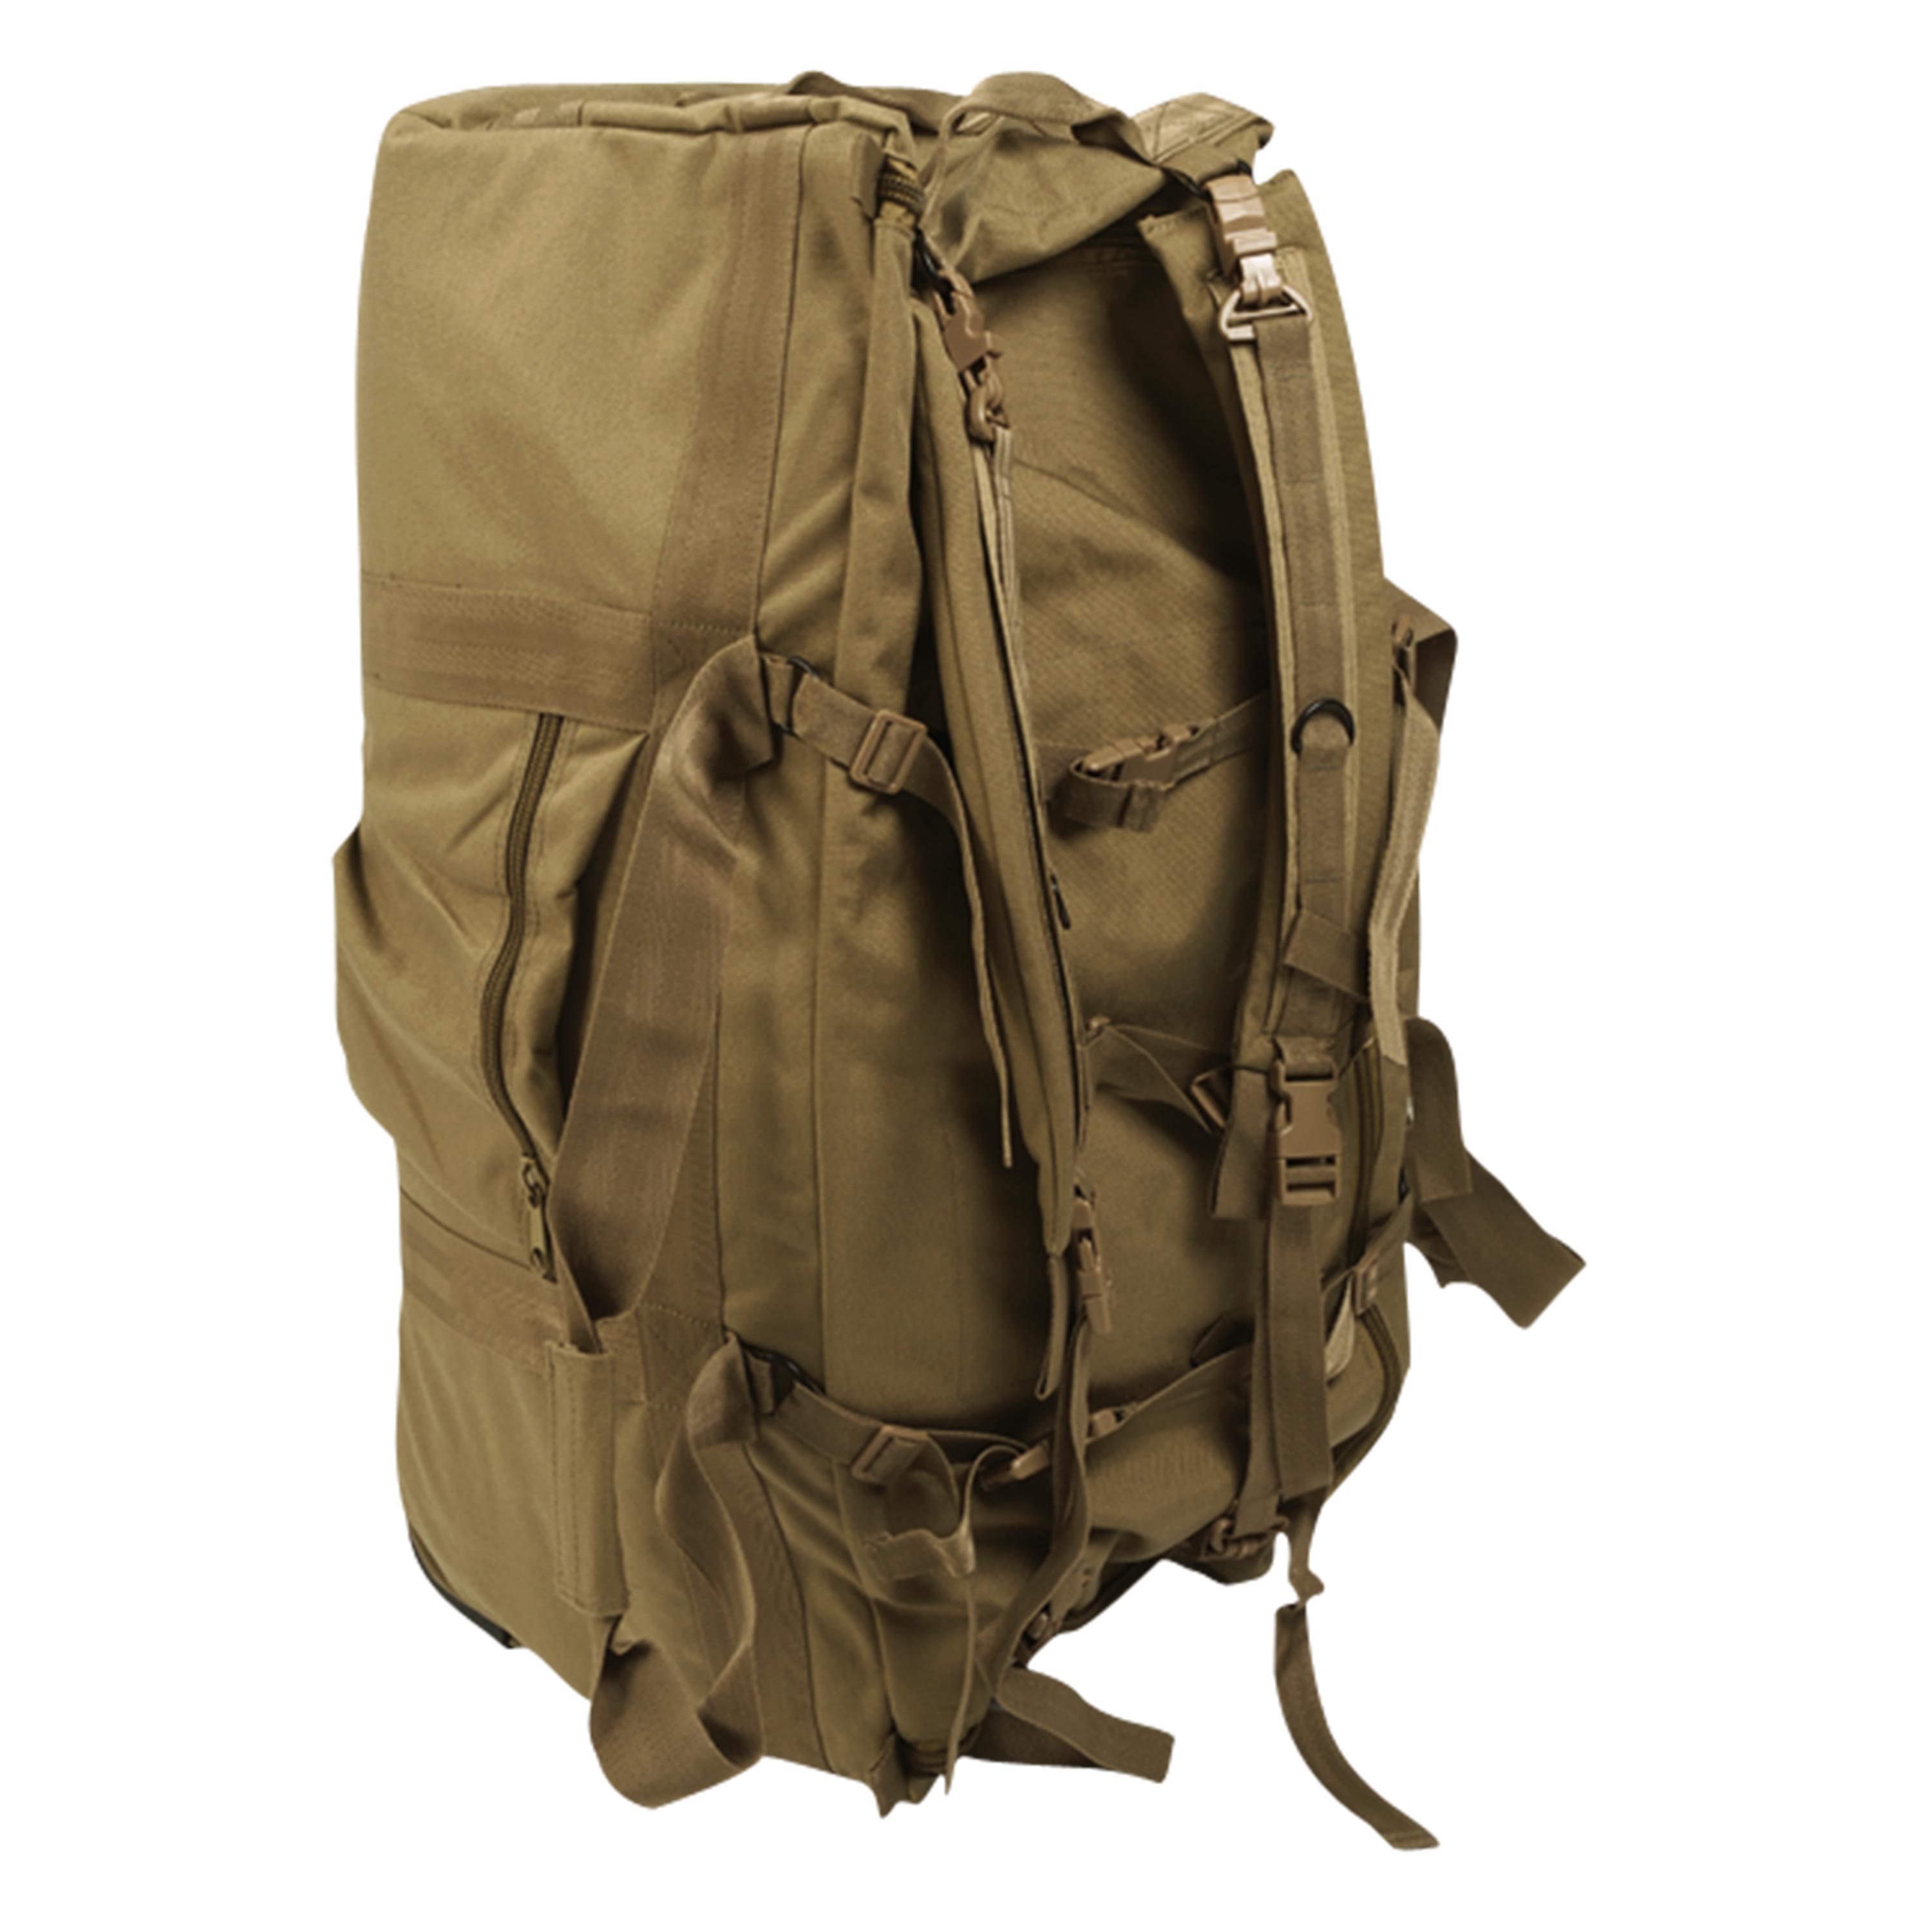 Mil-Tec Tactical Cargo Bag With Wheels coyote | Mil-Tec Tactical Cargo ...